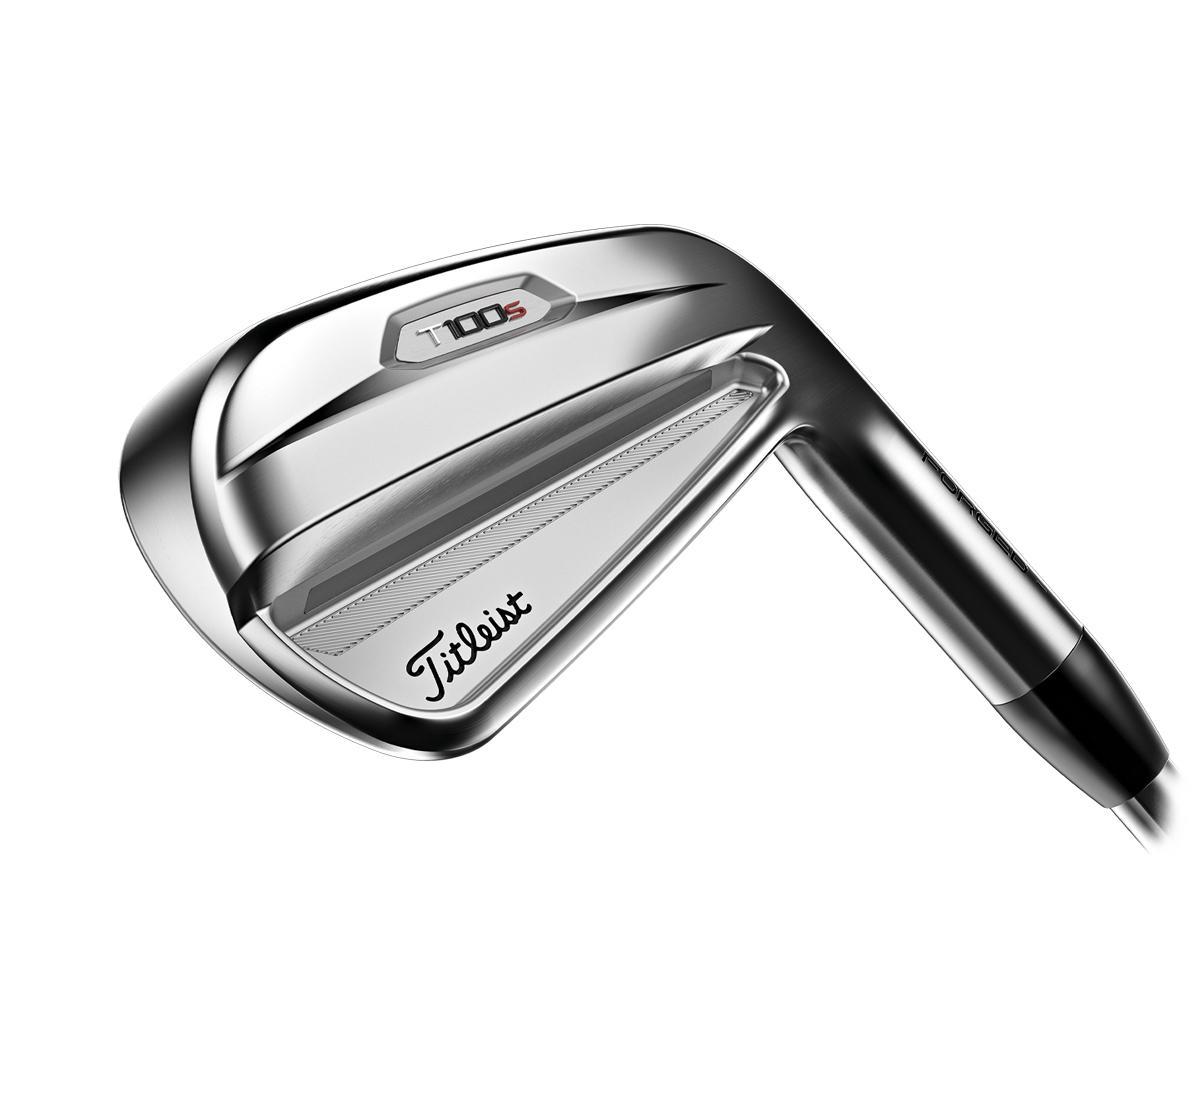 T100•S Irons by Titleist